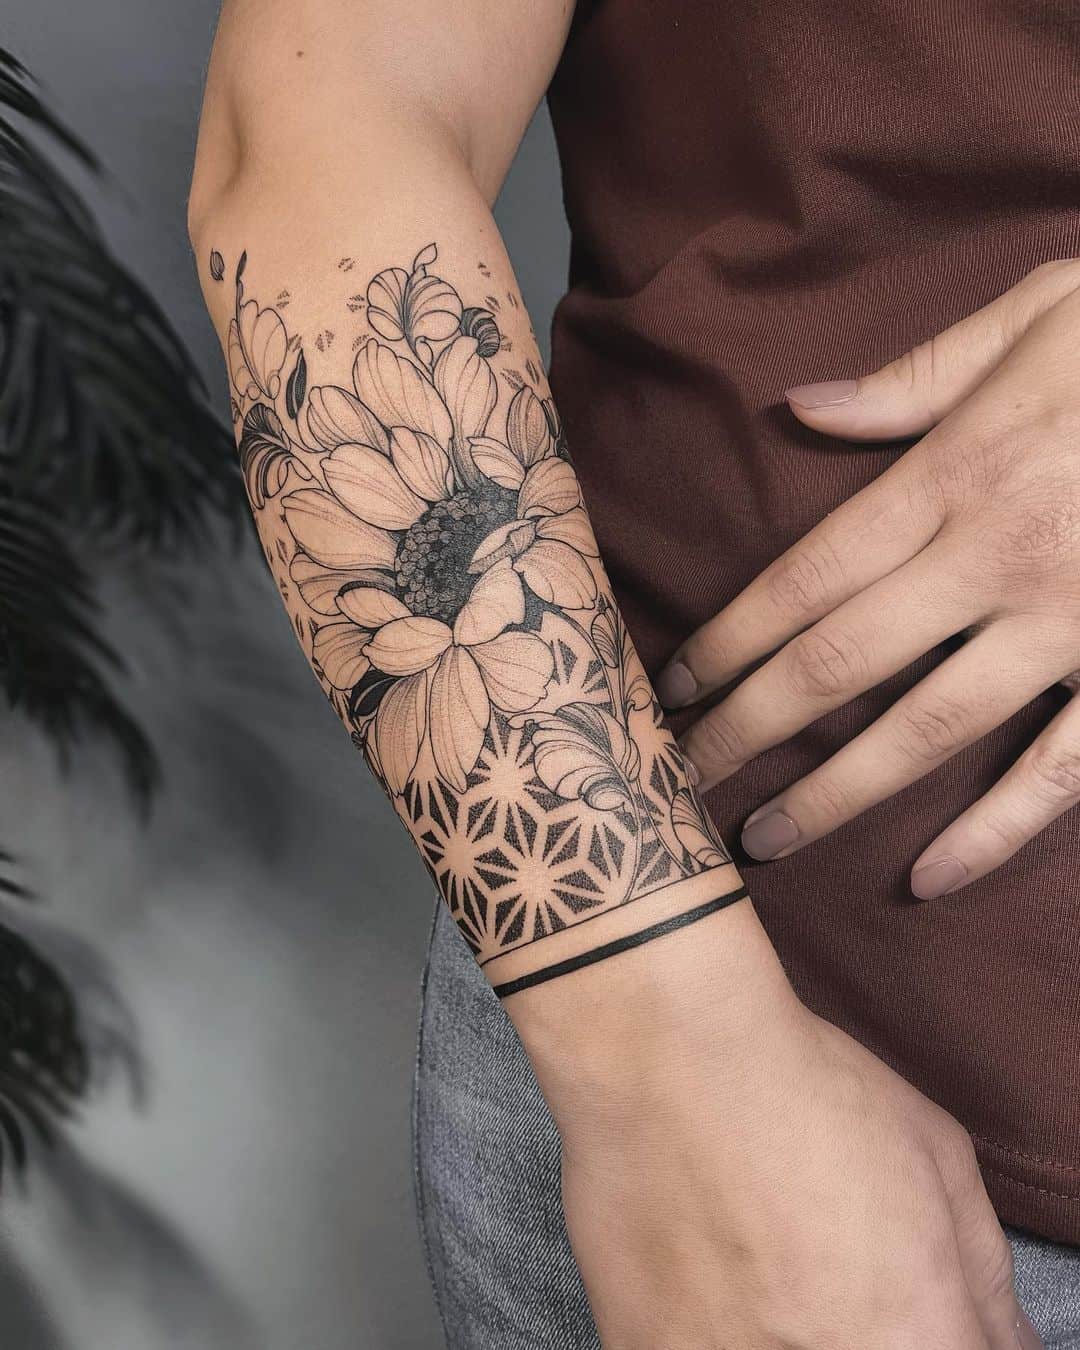 Sunflower tattoo on arm by crush.on .line